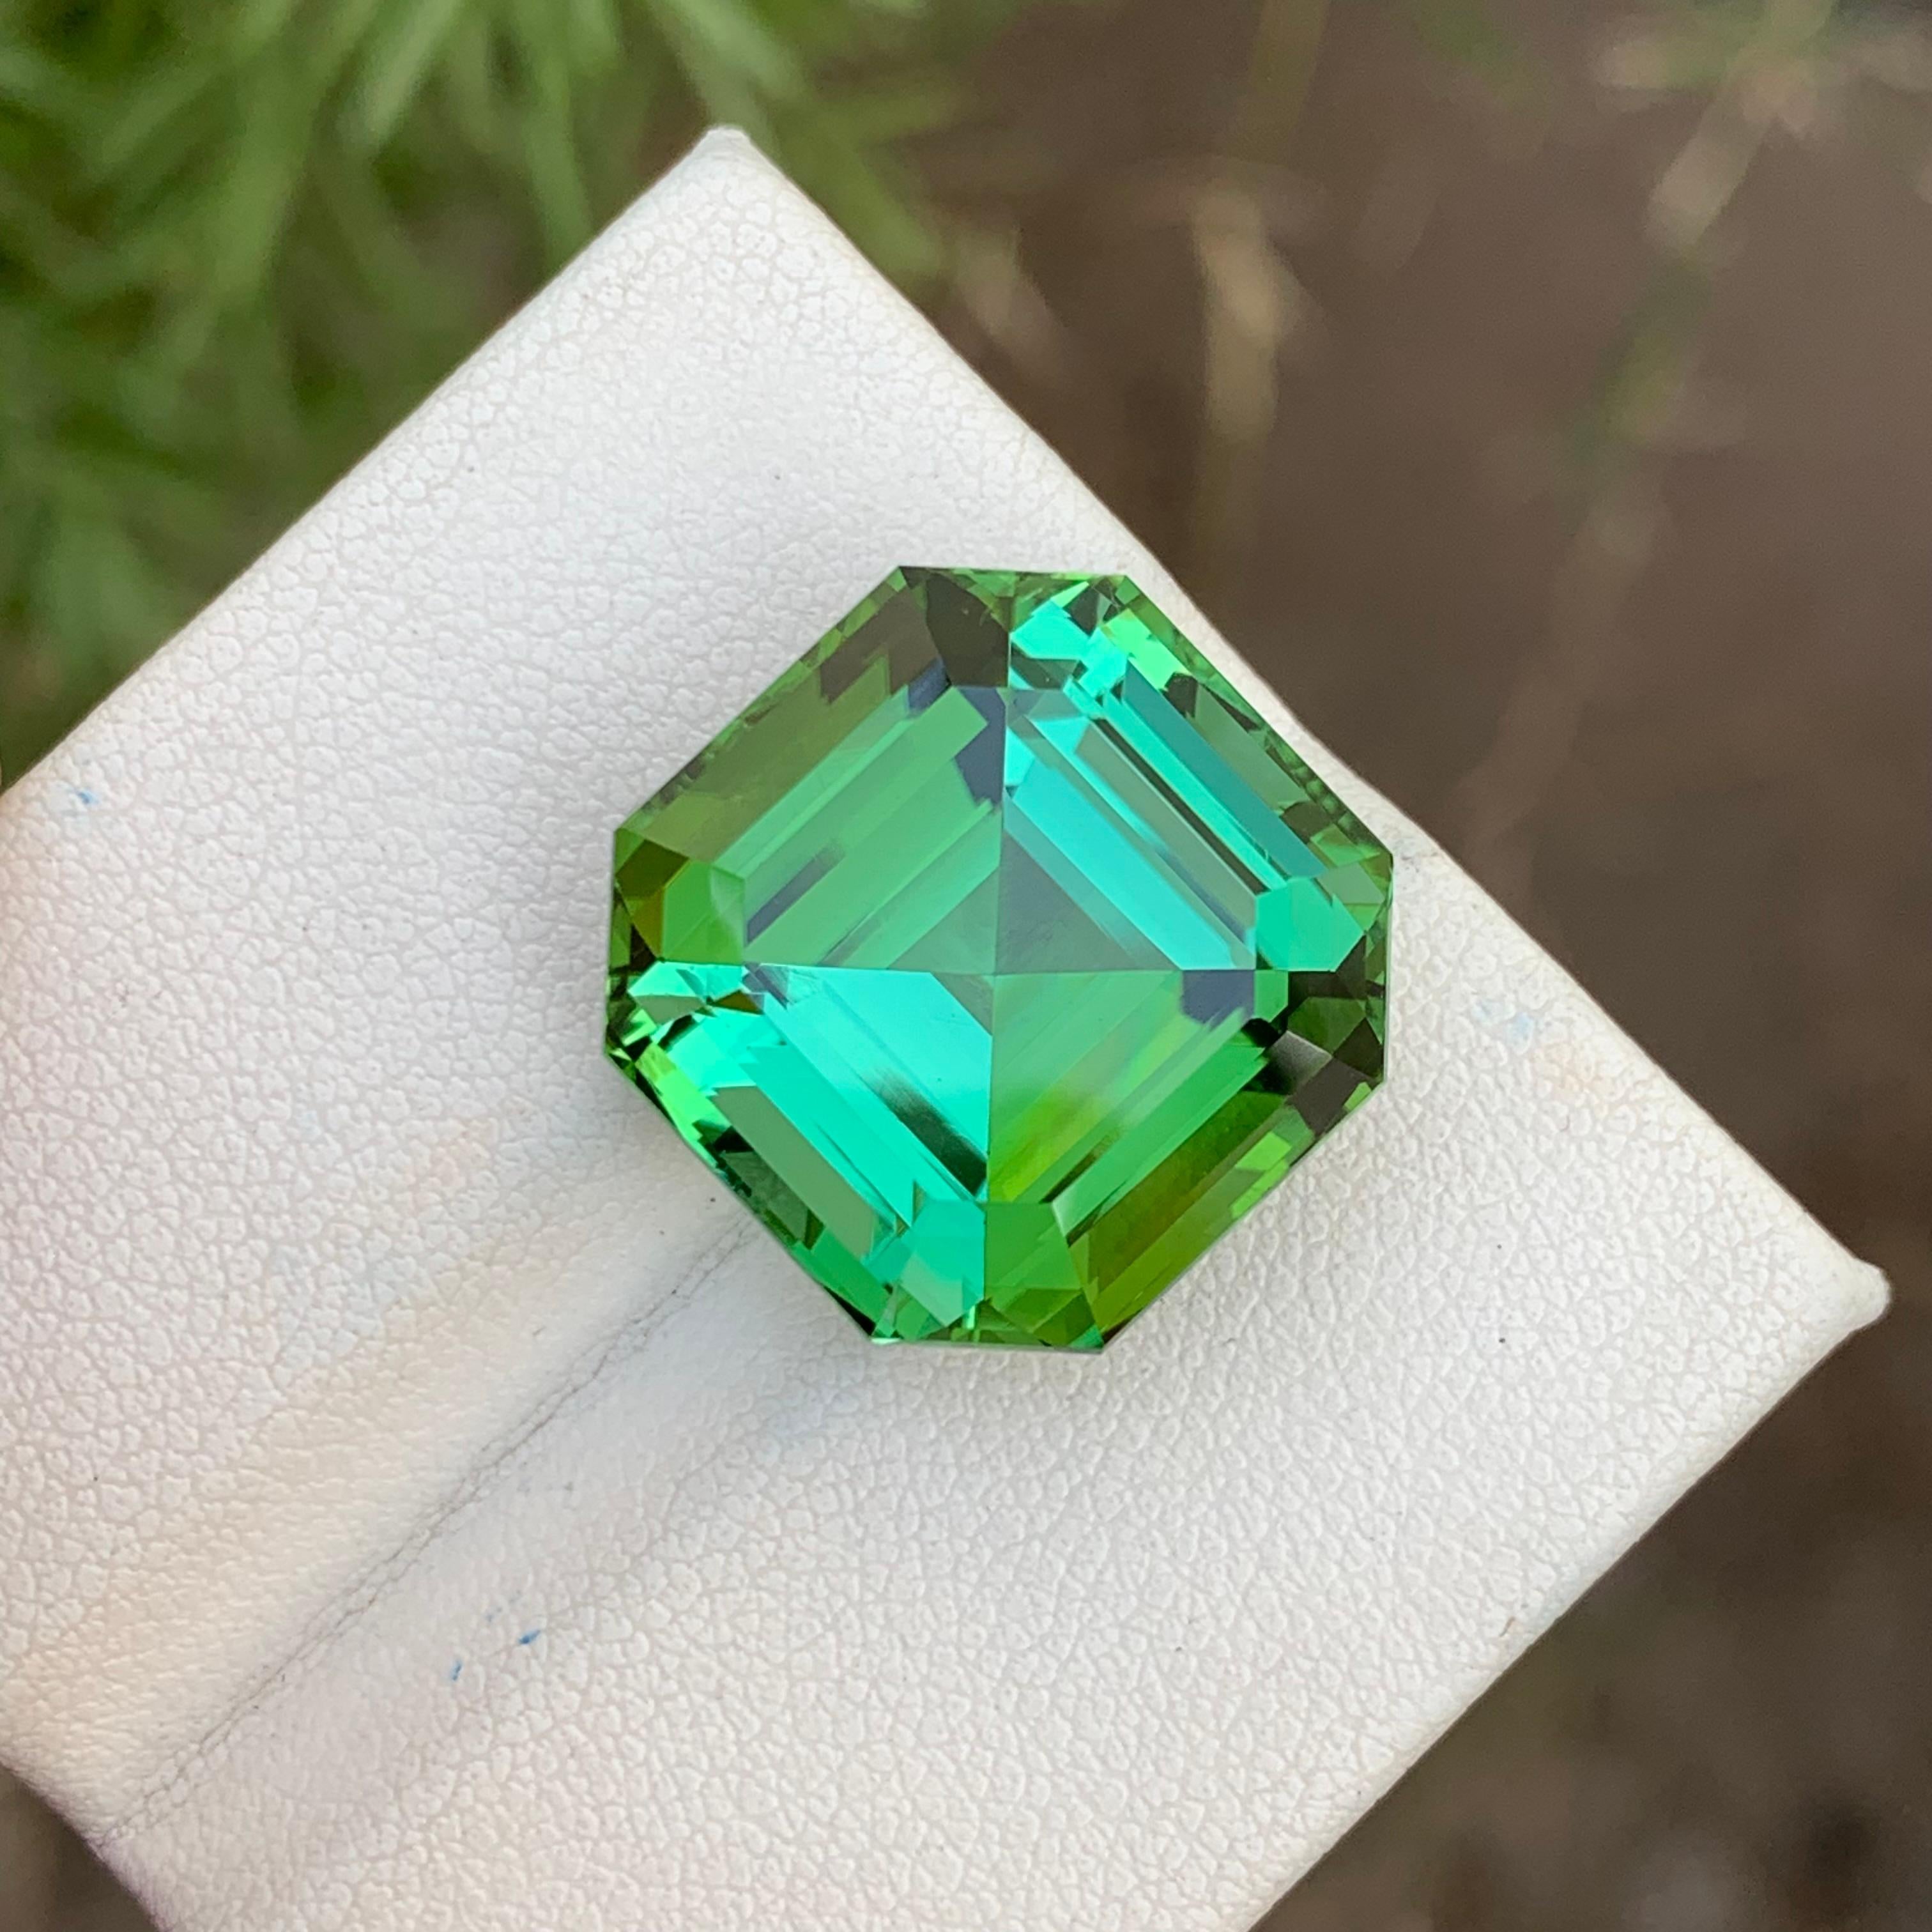 Loose Tourmaline 
Weight: 24.15 Carats 
Dimension: 16.8x16.8x11.9 Mm
Origin: Kunar Afghanistan 
Shape: Asscher Cut
Treatment: Non
Color: Green With Lagoon Shade
Certificate: On Demand
Green Tourmaline, renowned for its captivating hues, reaches new